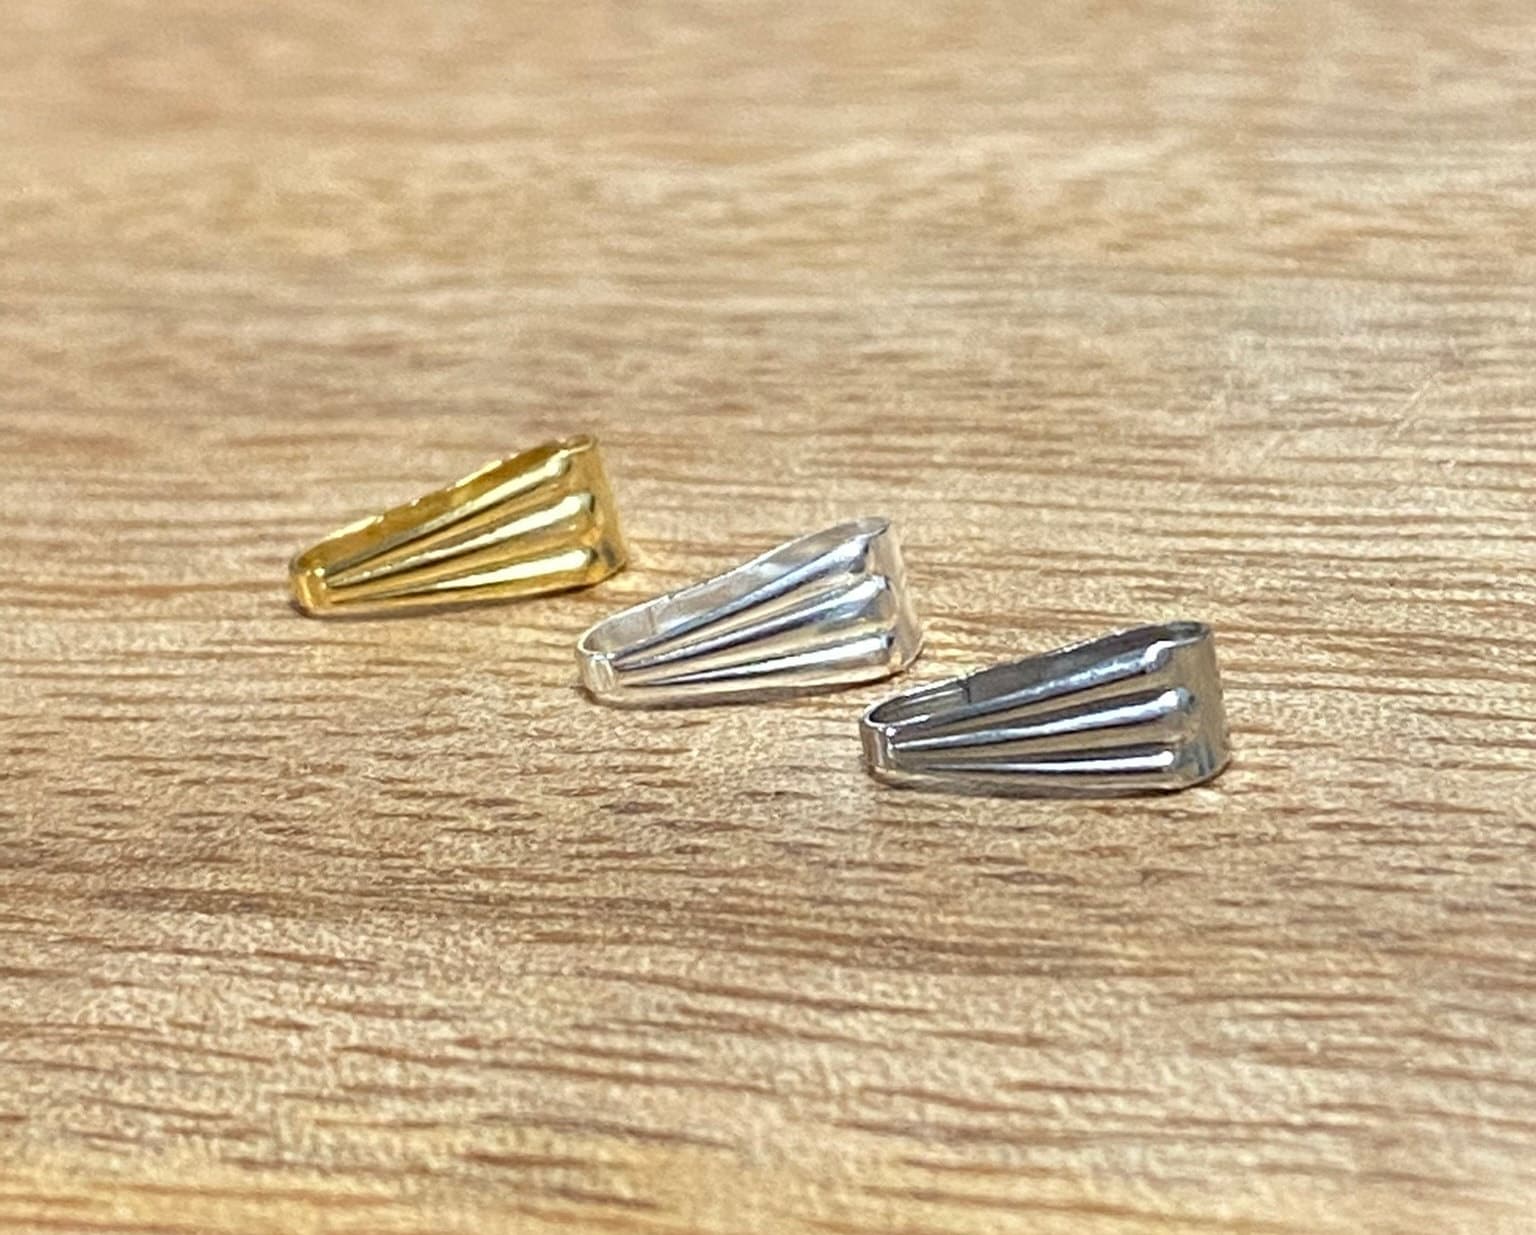 200 Pcs Pinch Bail for Jewelry Making Necklace Pendant Clasps Connectors  Pinch Clip for Necklace DIY, 8.5 x 3.5 mm